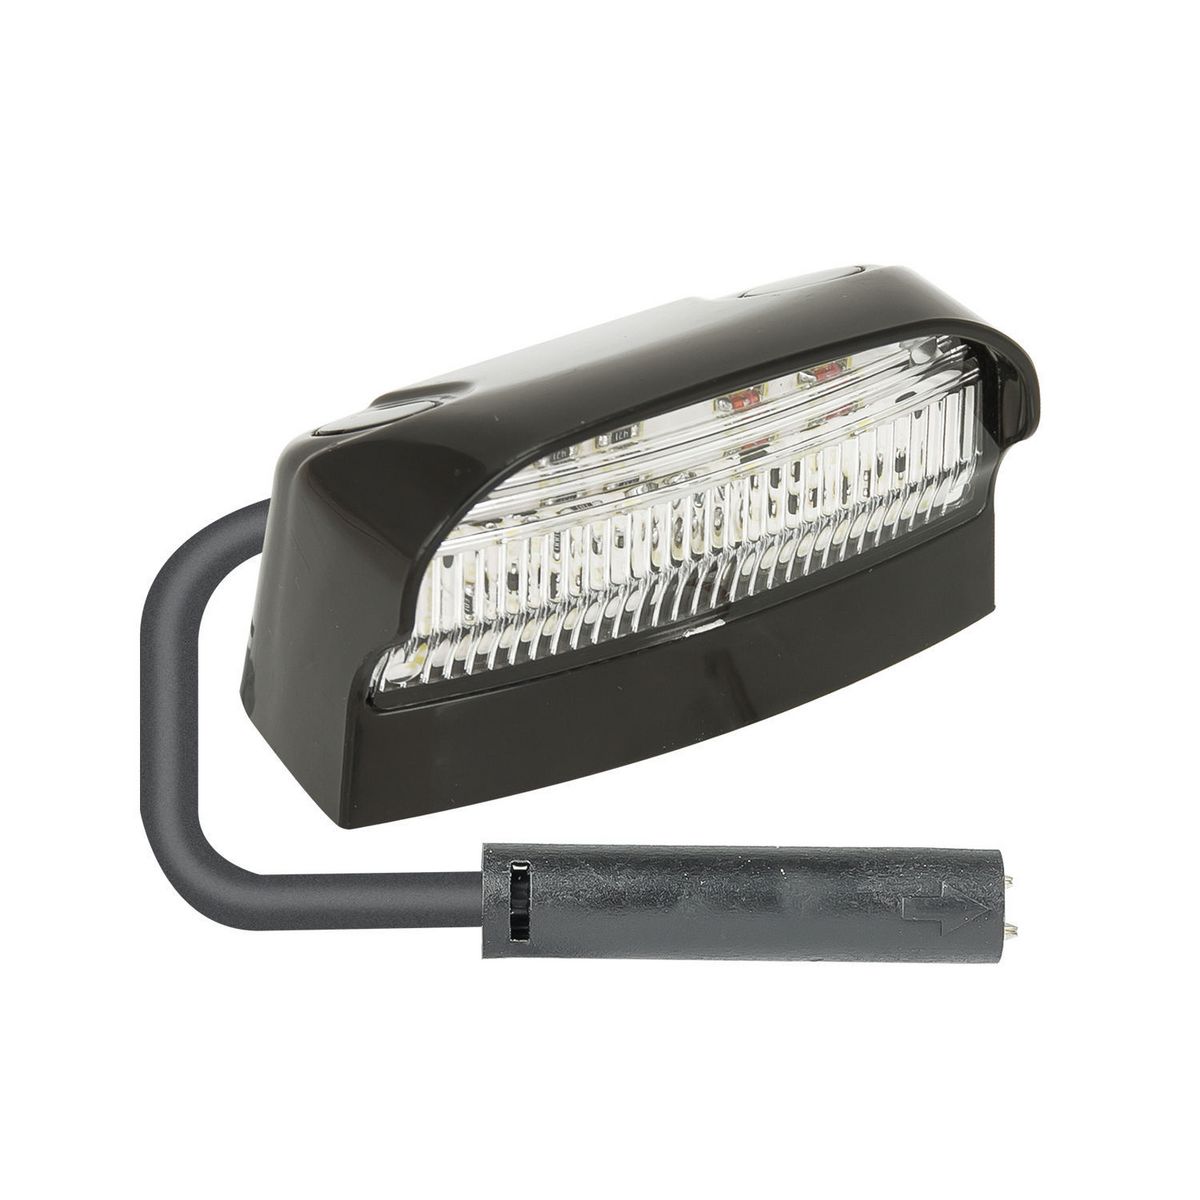 41 SERIES Licence Plate Lamps TO SUIT DT PLUG